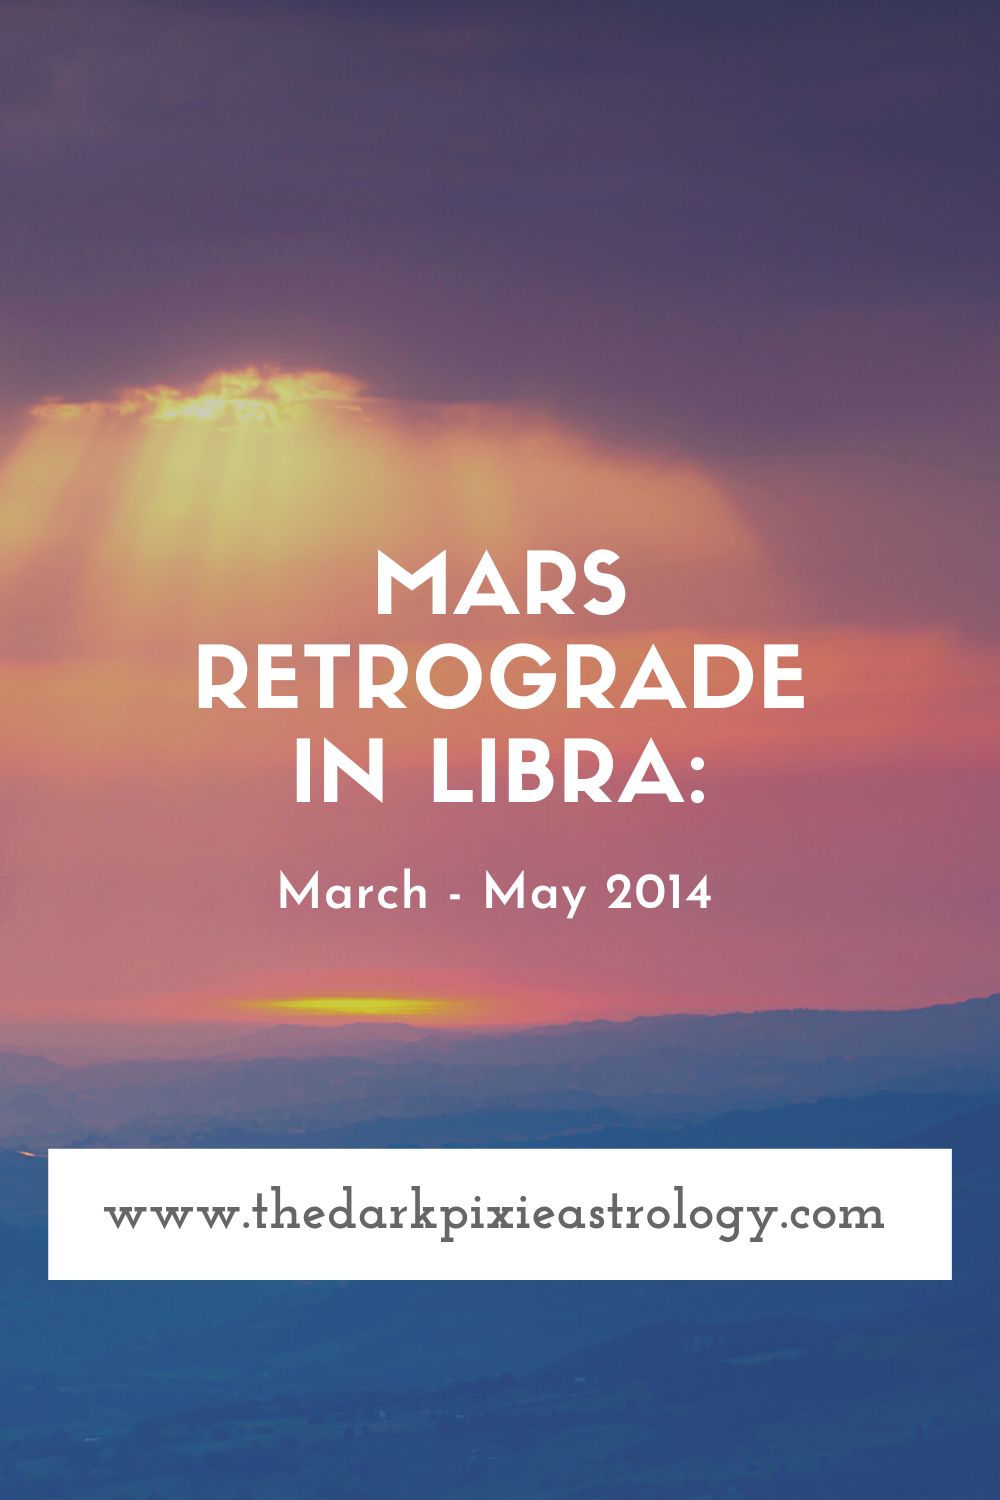 Mars retrograde in Libra: March - May 2014 - The Dark Pixie Astrology